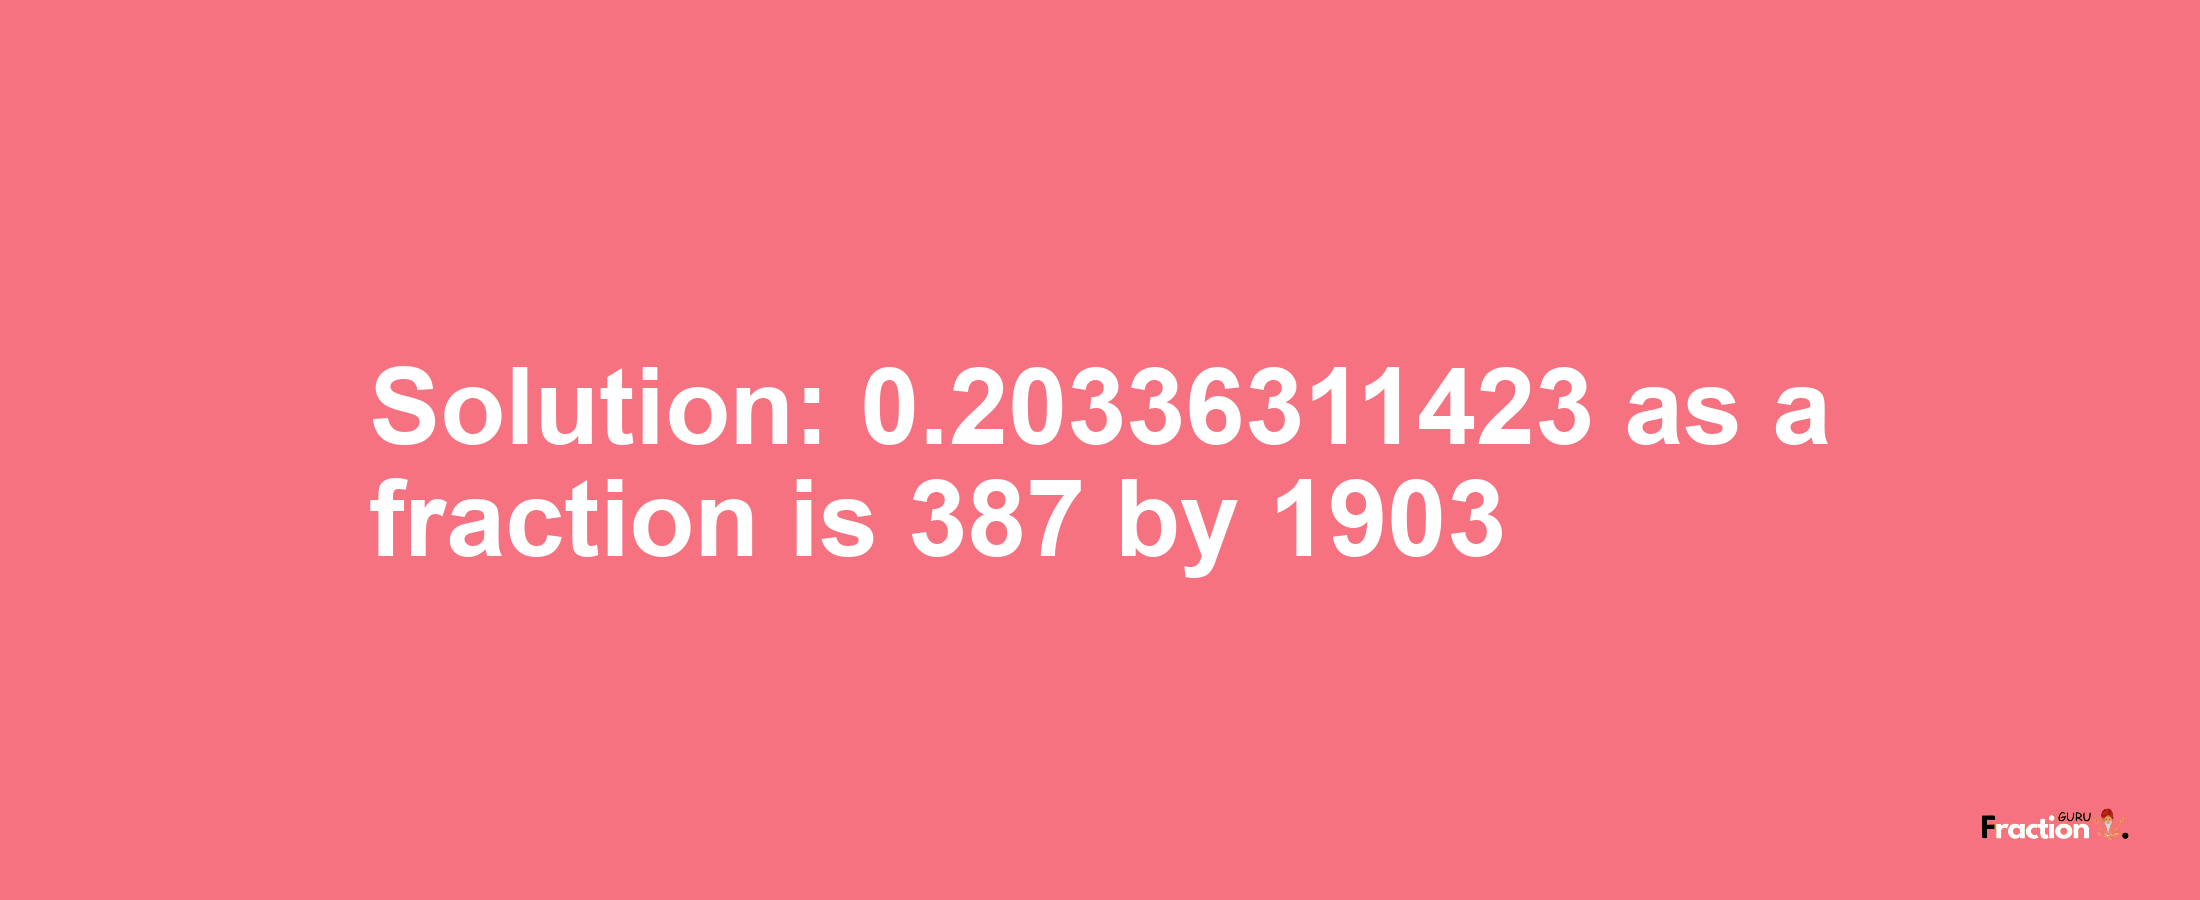 Solution:0.20336311423 as a fraction is 387/1903